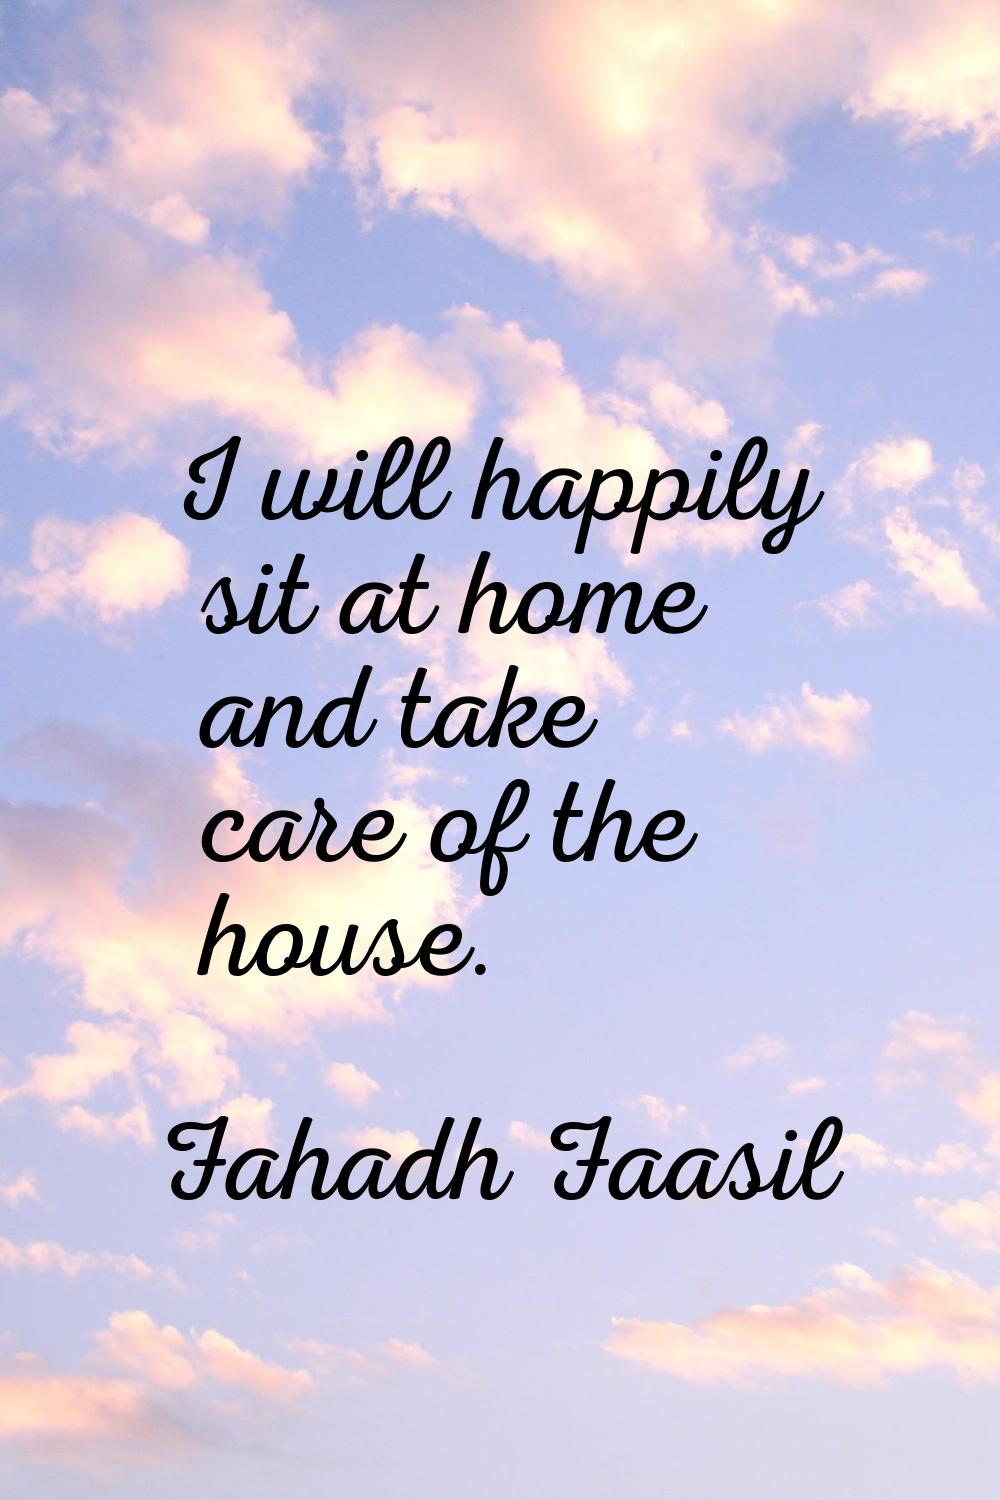 I will happily sit at home and take care of the house.